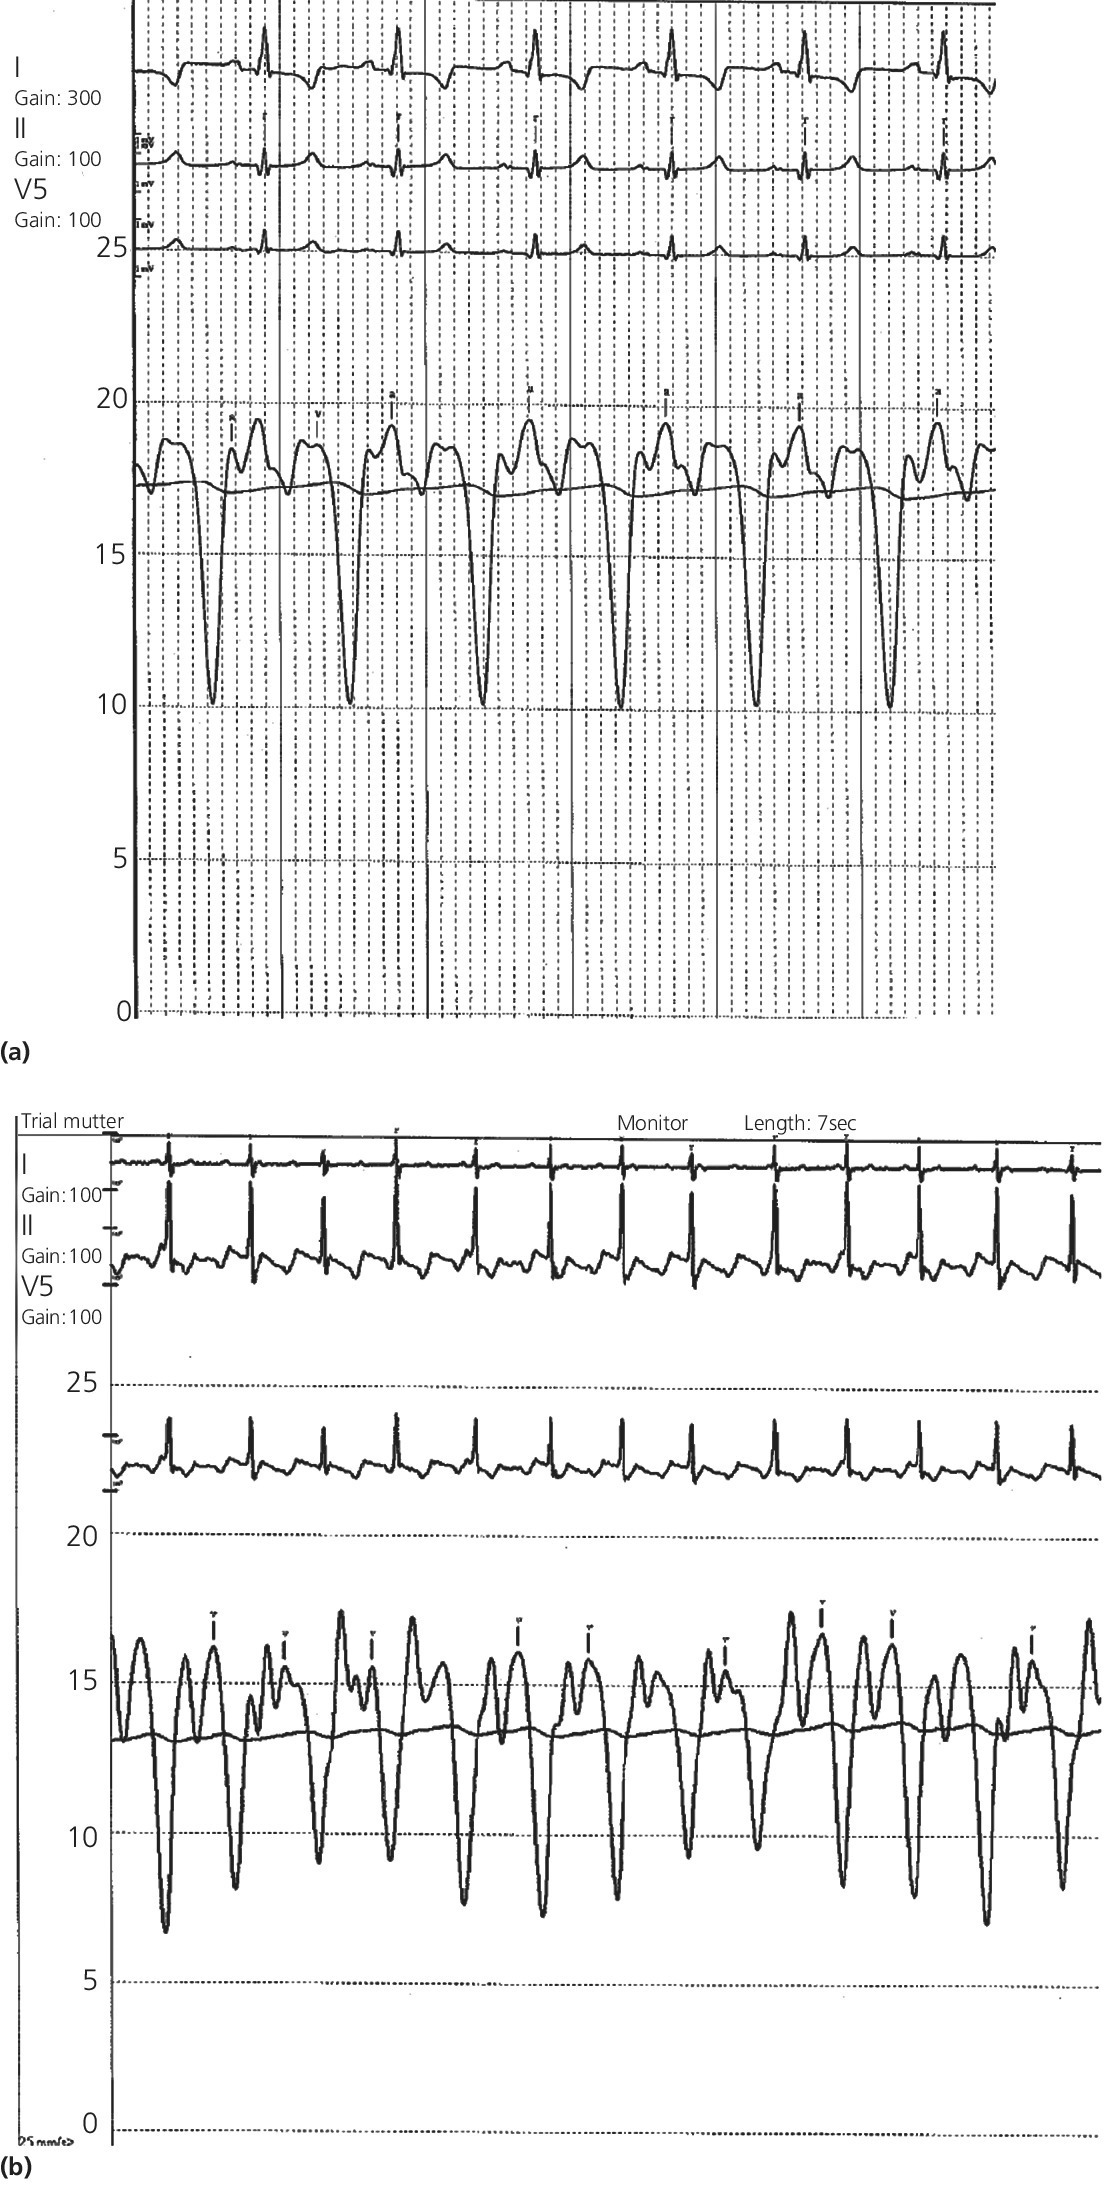 2 ECGs of RA tracings from 2 patients with constrictive pericarditis displaying waves indicating elevated RA pressure, prominent Y descent, and lack of respiratory variation.